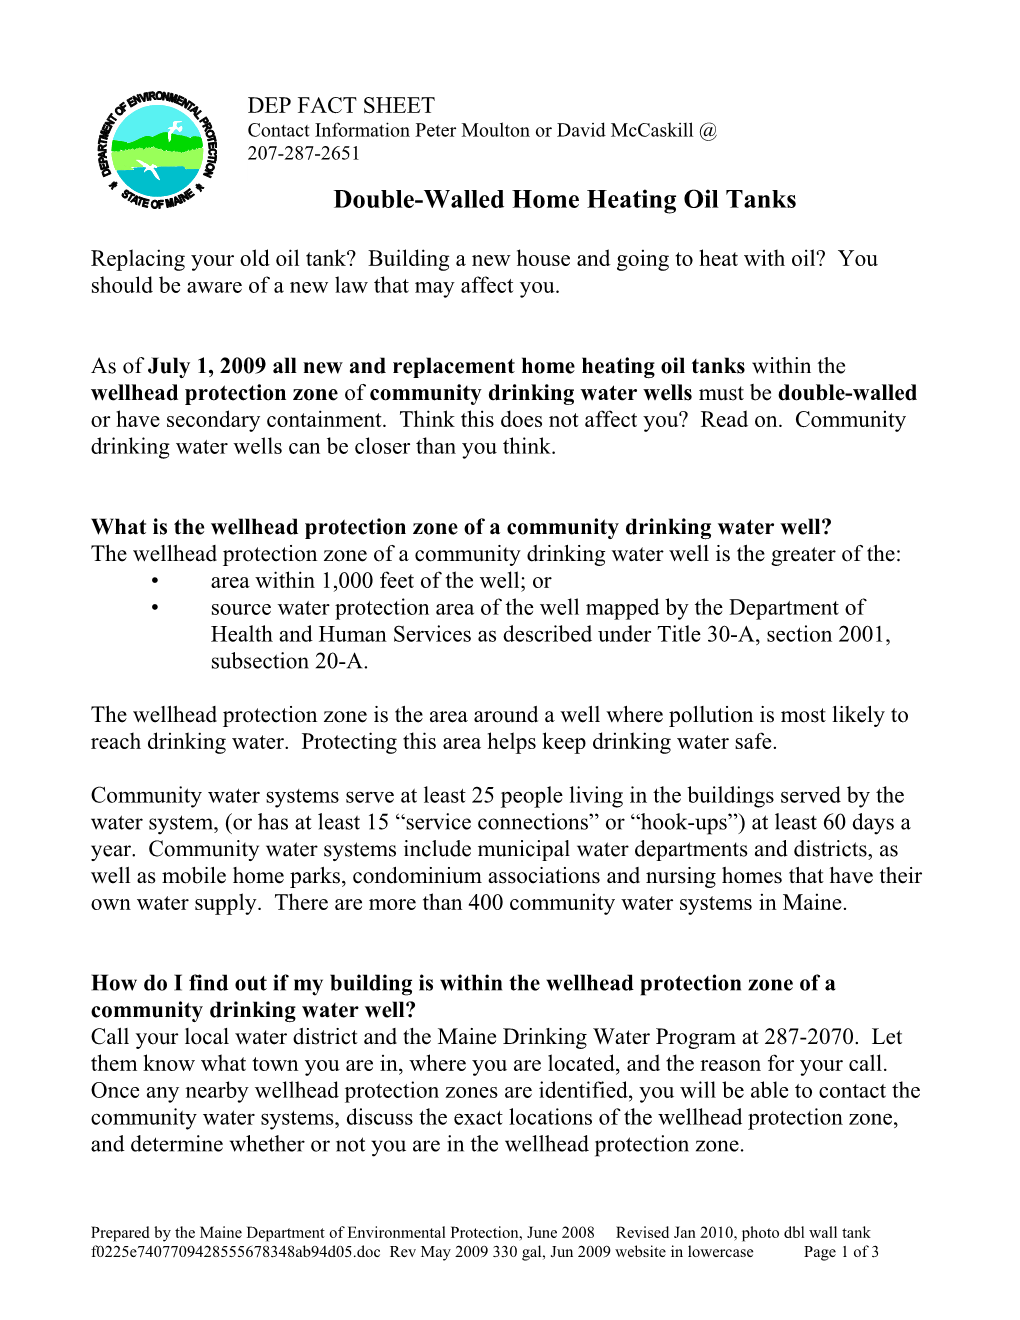 Fact Sheet for Double Wall Tanks for LD 2073